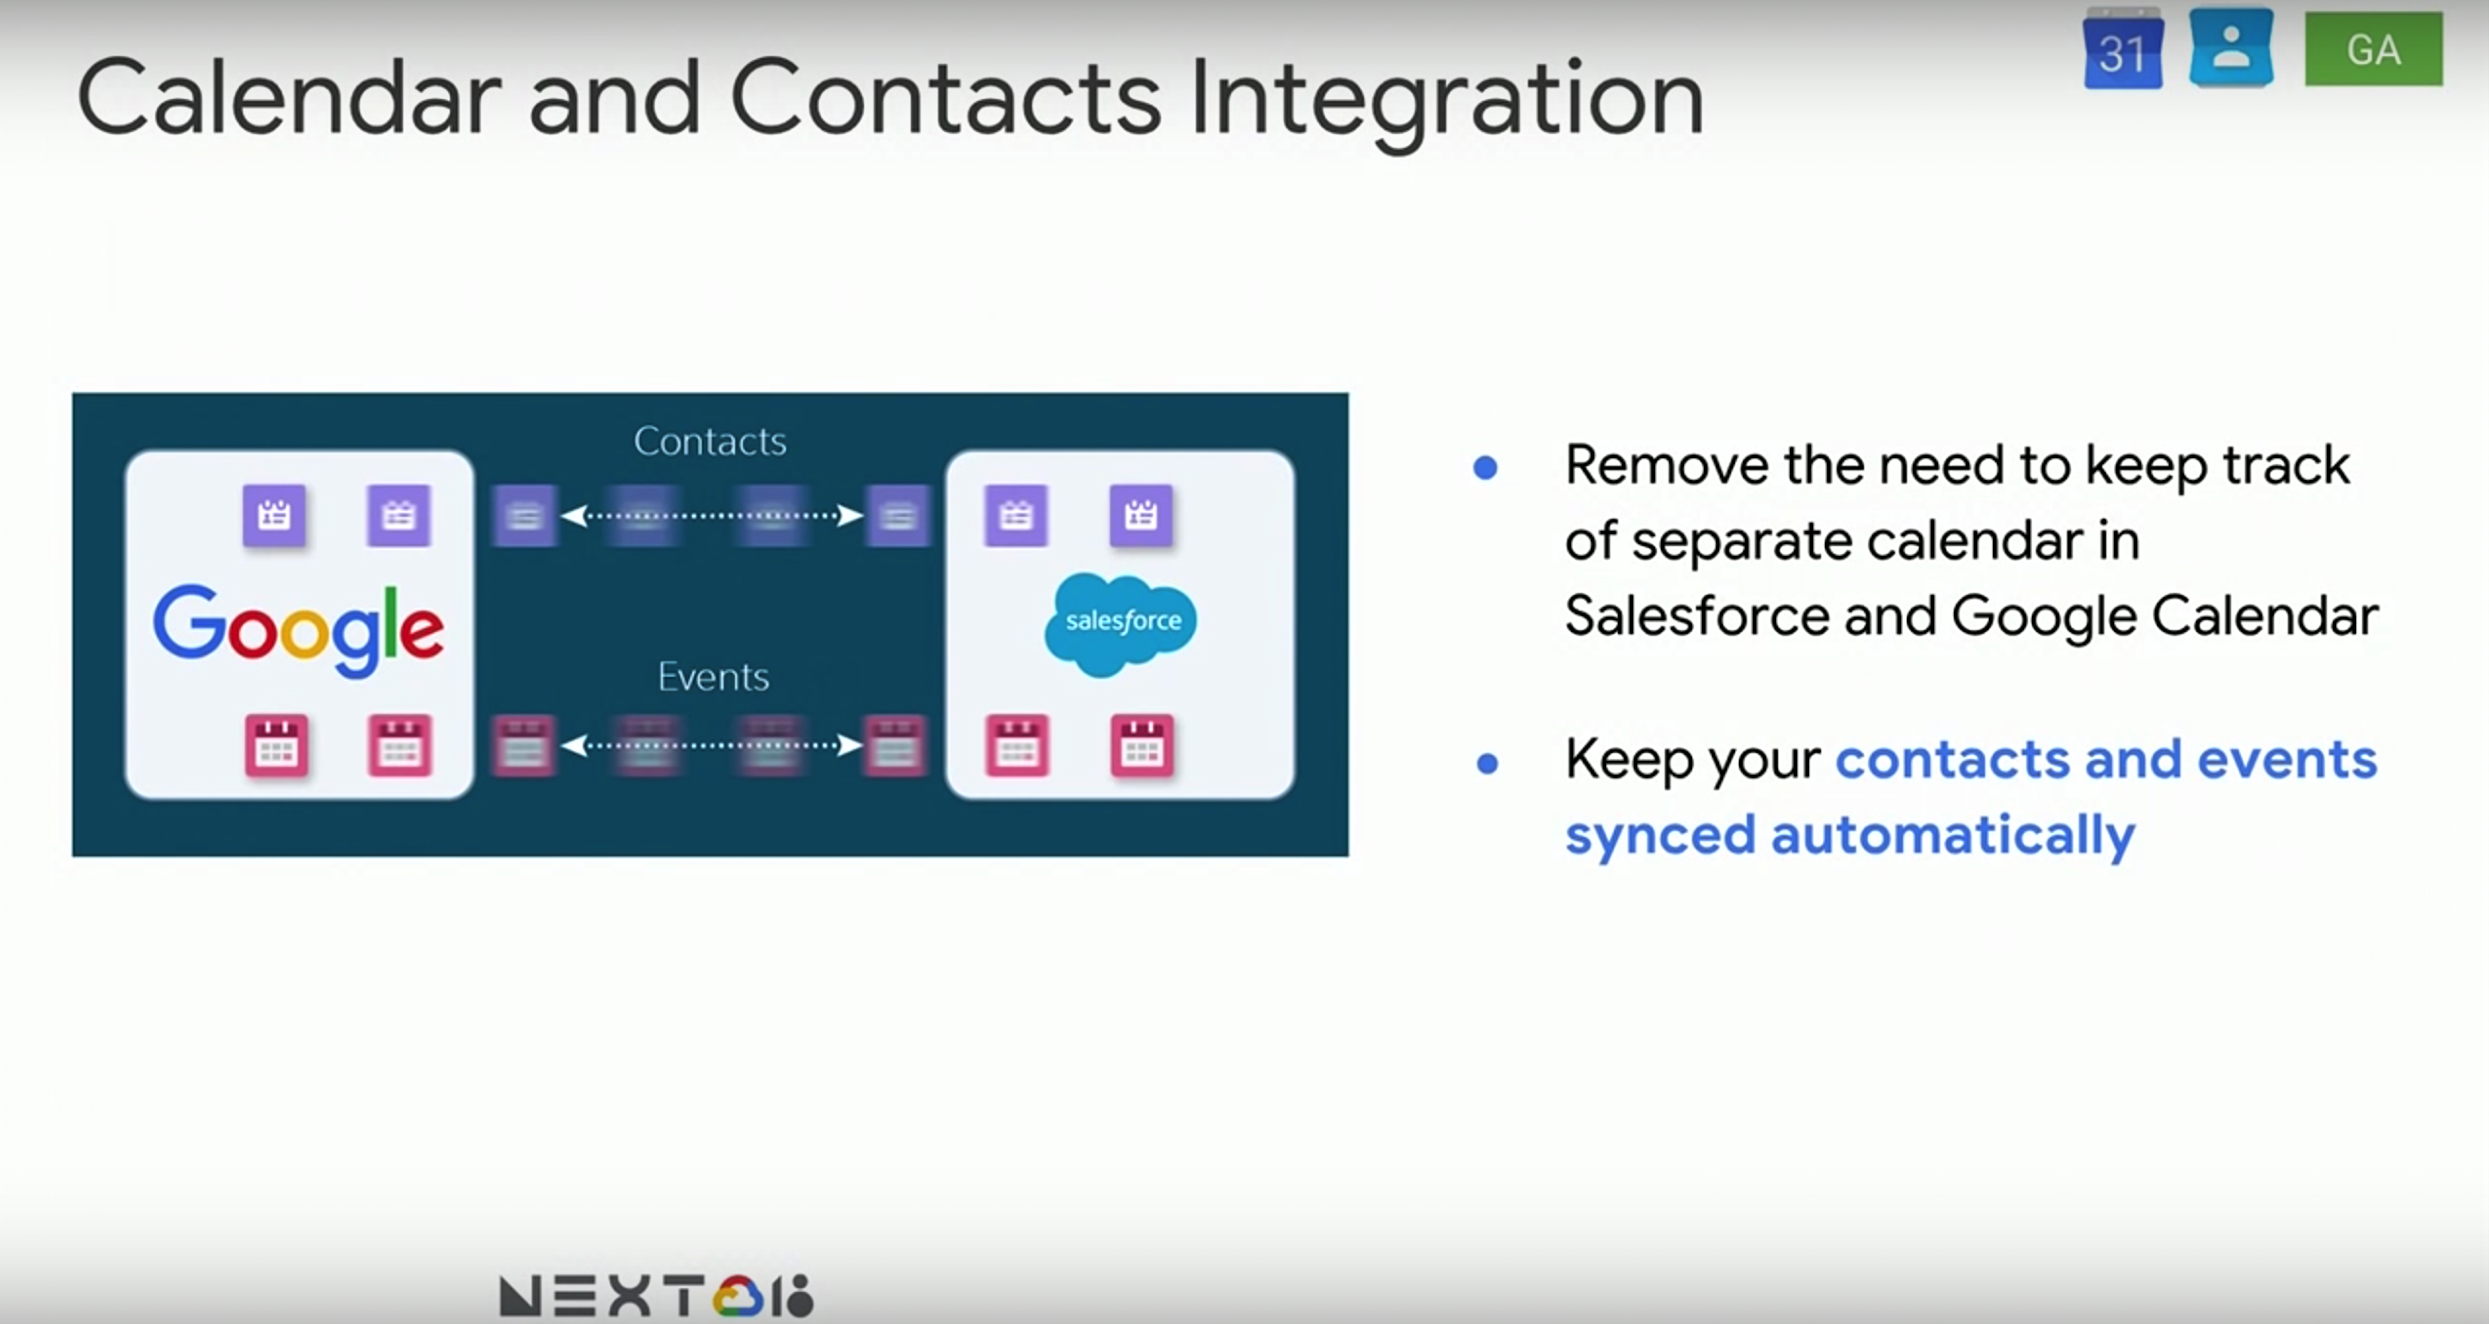 Google to Salesforce Calendar and Contacts Integration